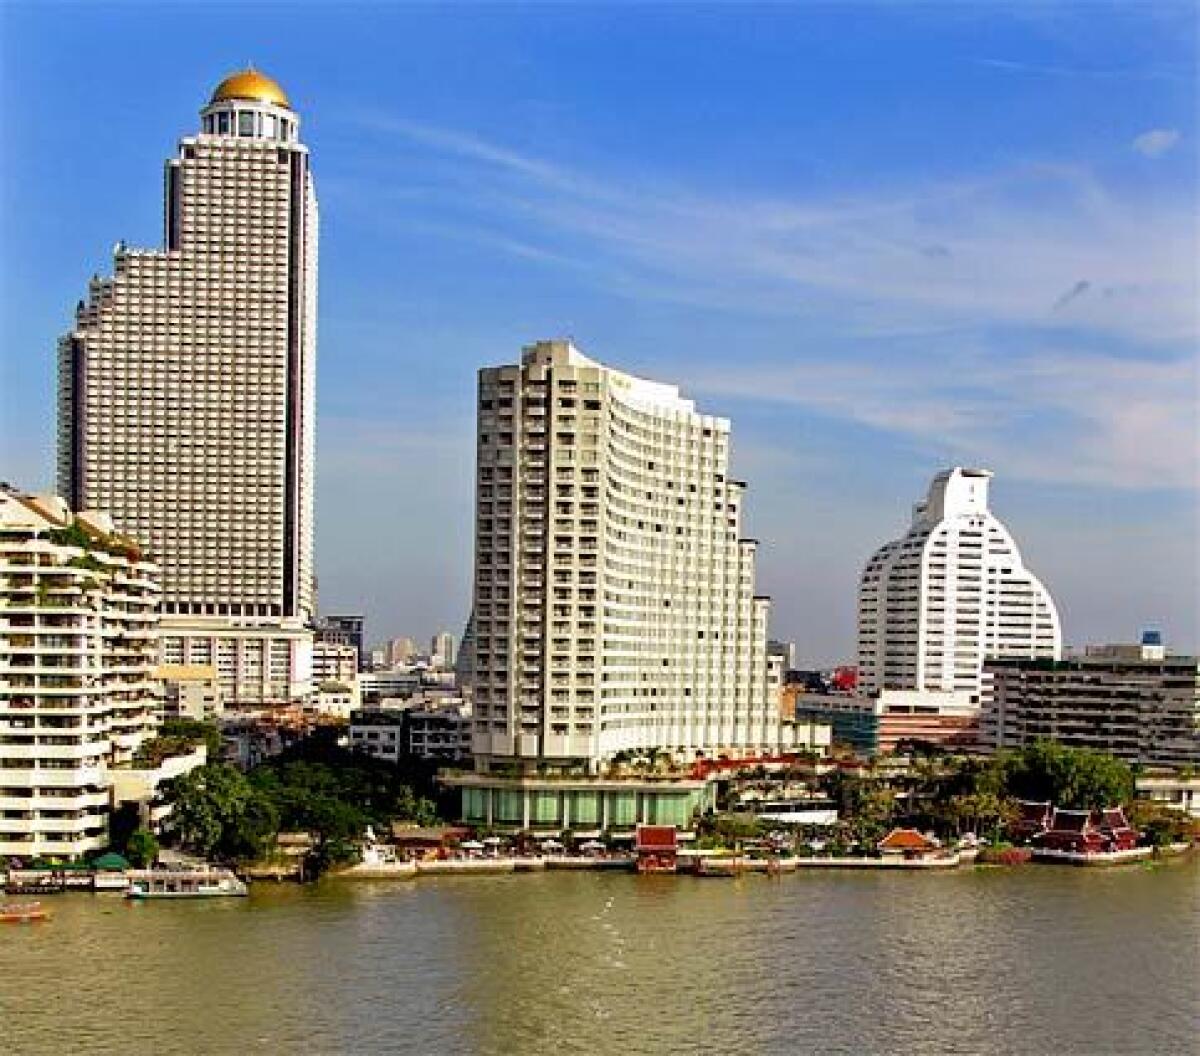 Bangkok's Shangri-La Hotel, center, has staked out not only a place on the east bank of the Chao Phraya River but a position on the Thai city's list of five-star hotels. And the Shangri-La and its Bangkok peers provide their hospitality at gratifyingly modest rates. In the Shangri-La's case, that means doubles as low as $200.